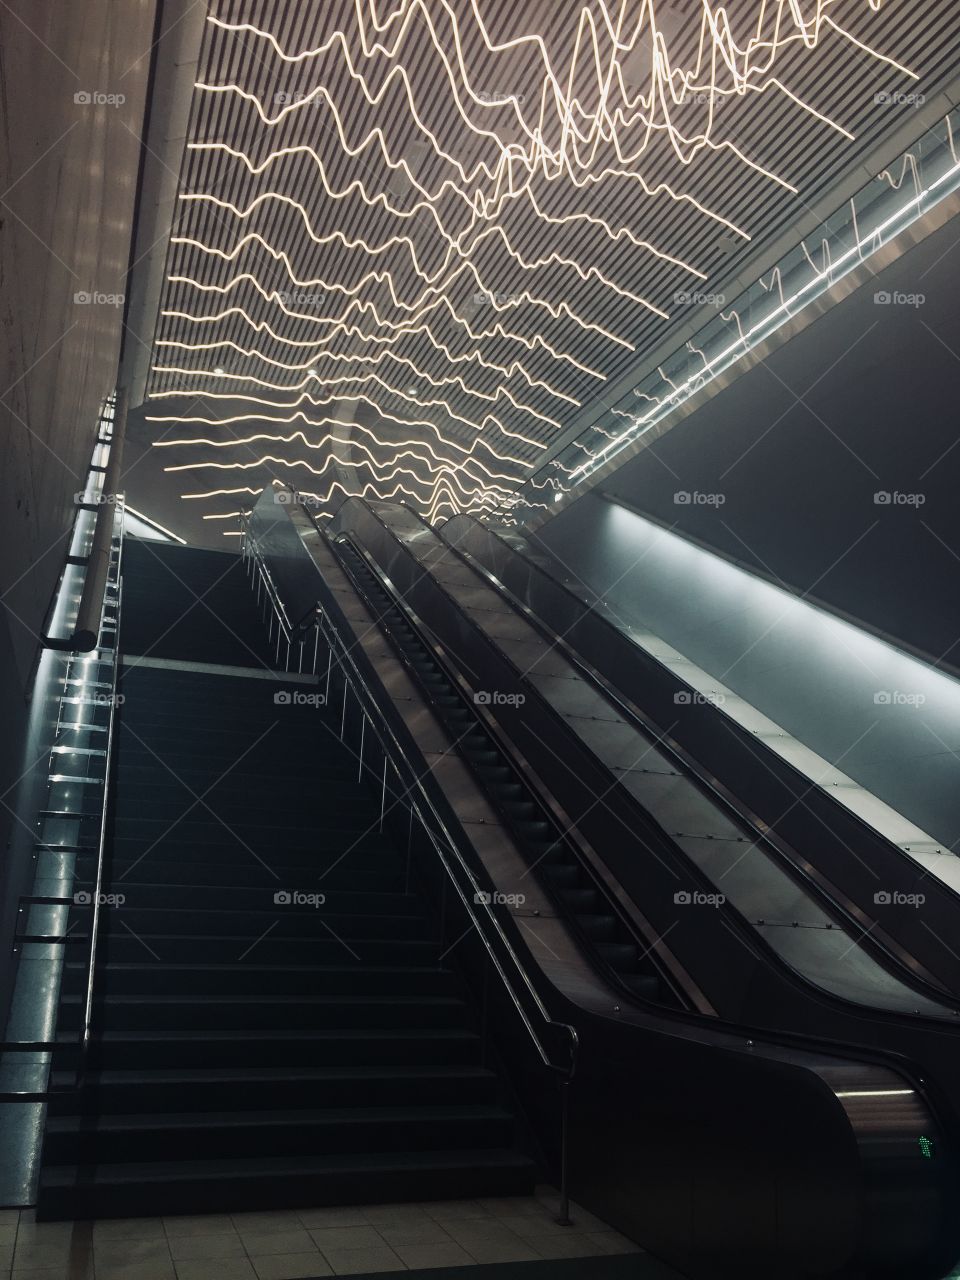 The underground metro station has a unique light installation featuring heartbeat shaped LED lights that cover the ceiling above the tall metal escalators. 